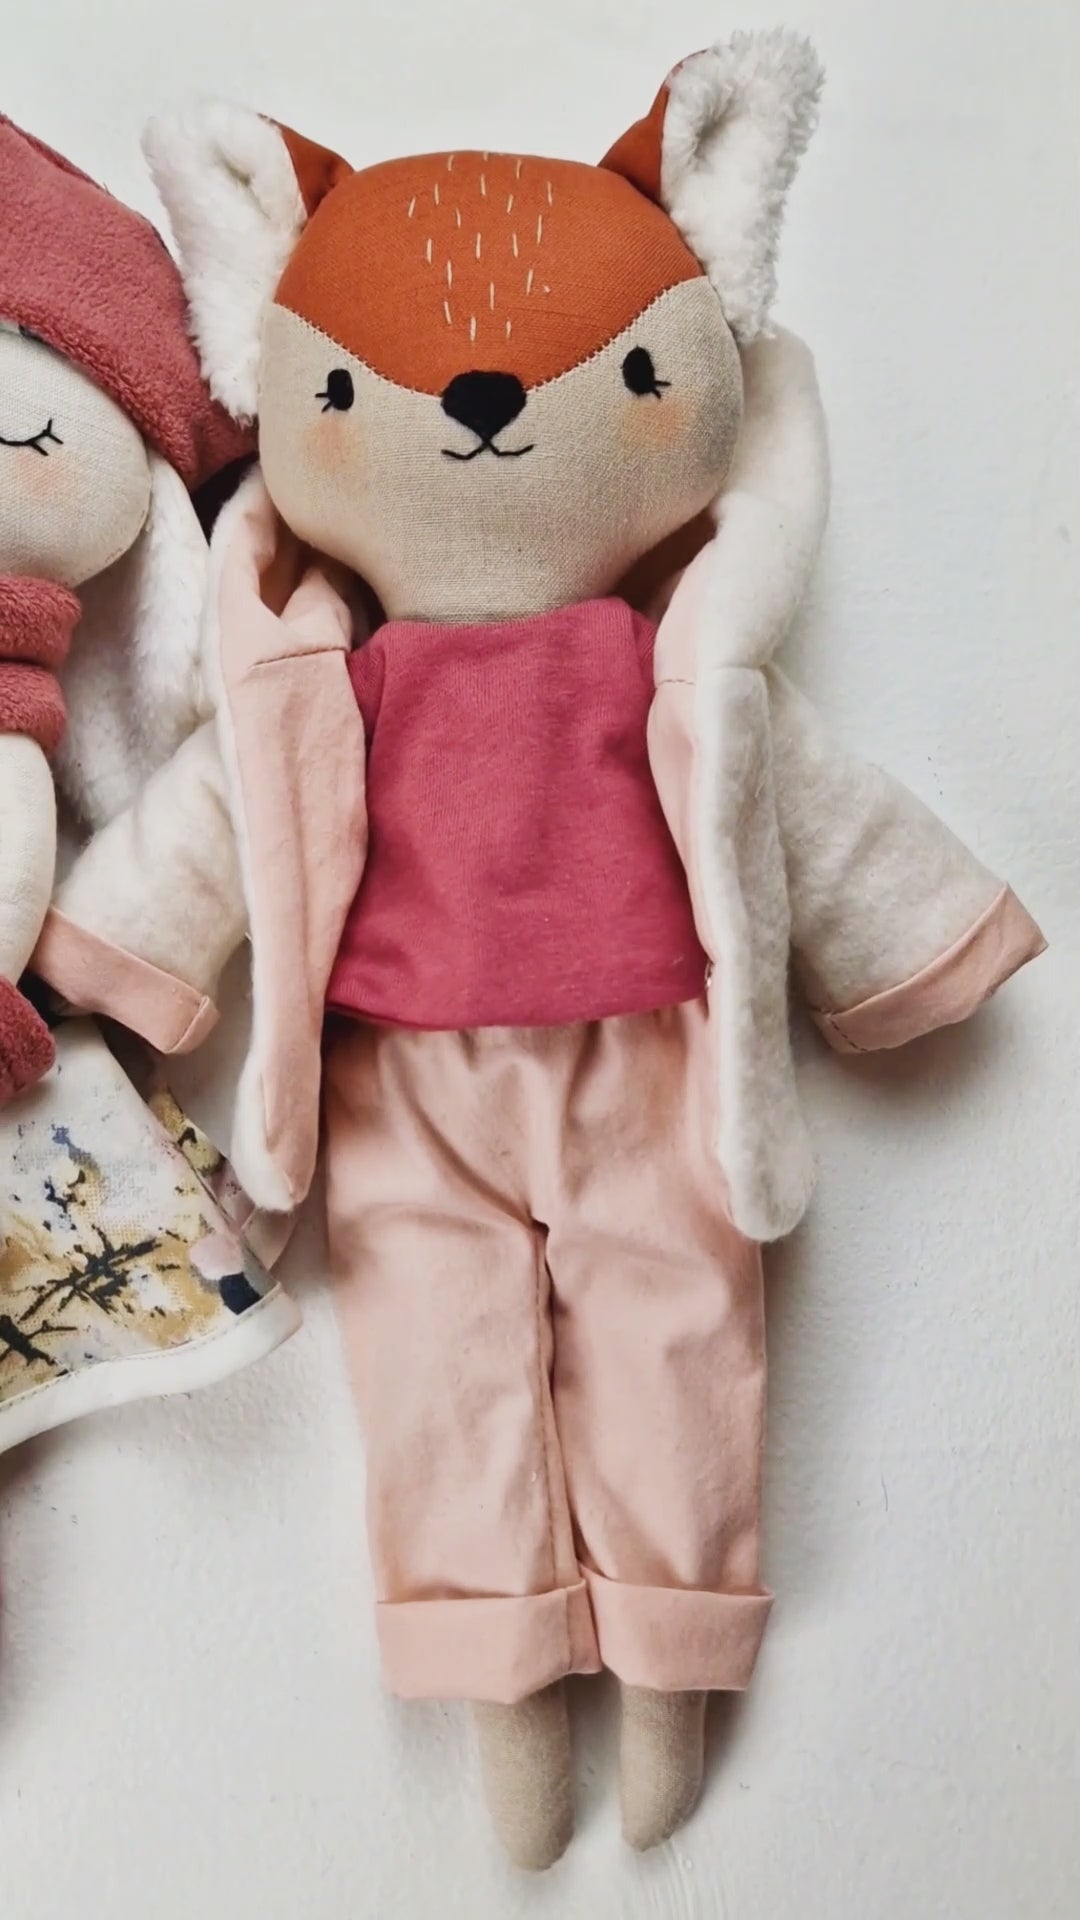 Forest doll set Bunny, Bear and Fox - PDF sewing pattern and tutorial